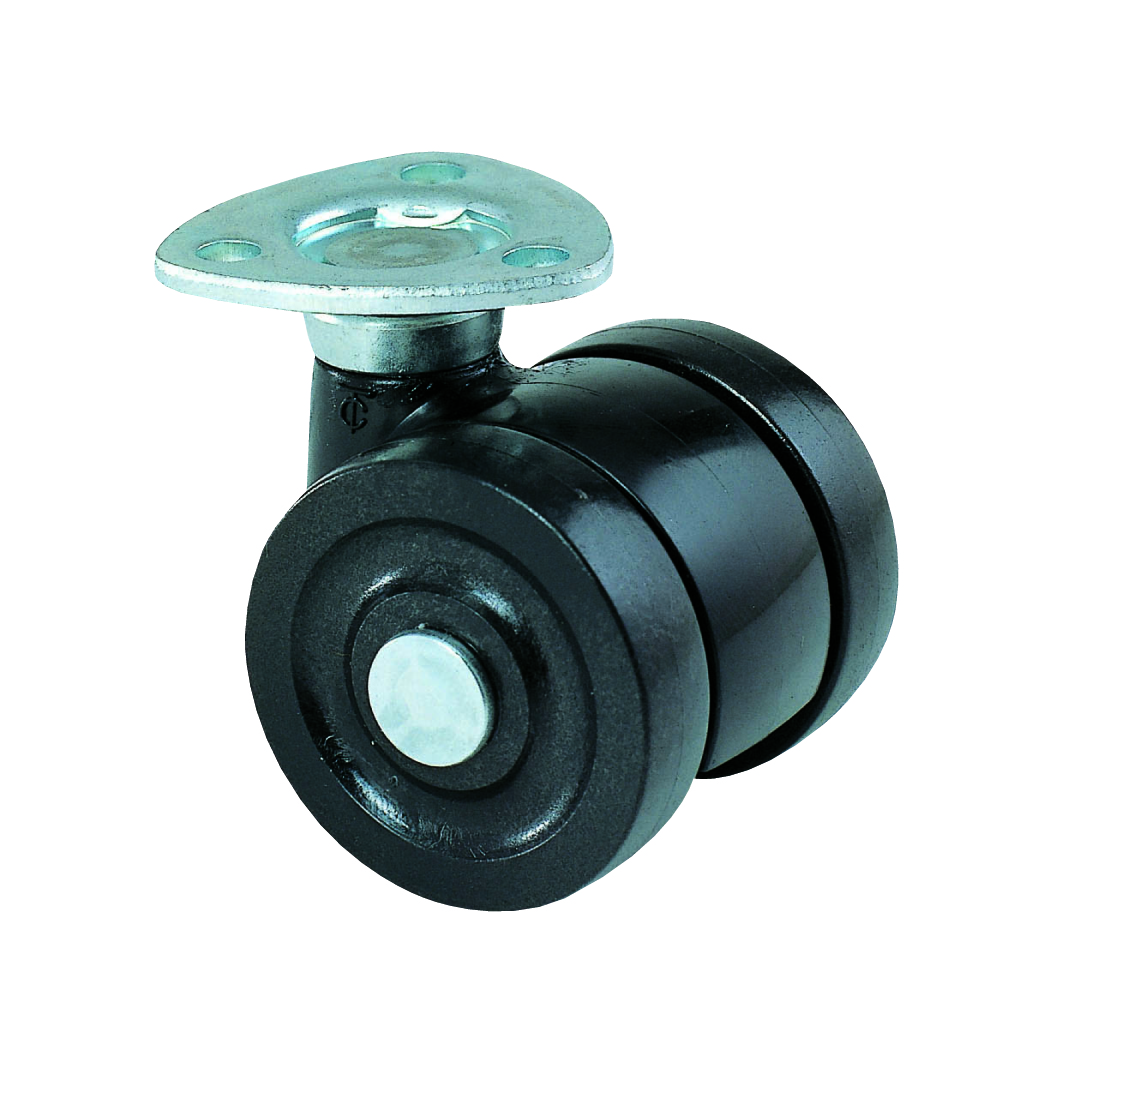 Casters - With swivel plate, reinforced plastic double caster, without brake, TX40/TX50 series.